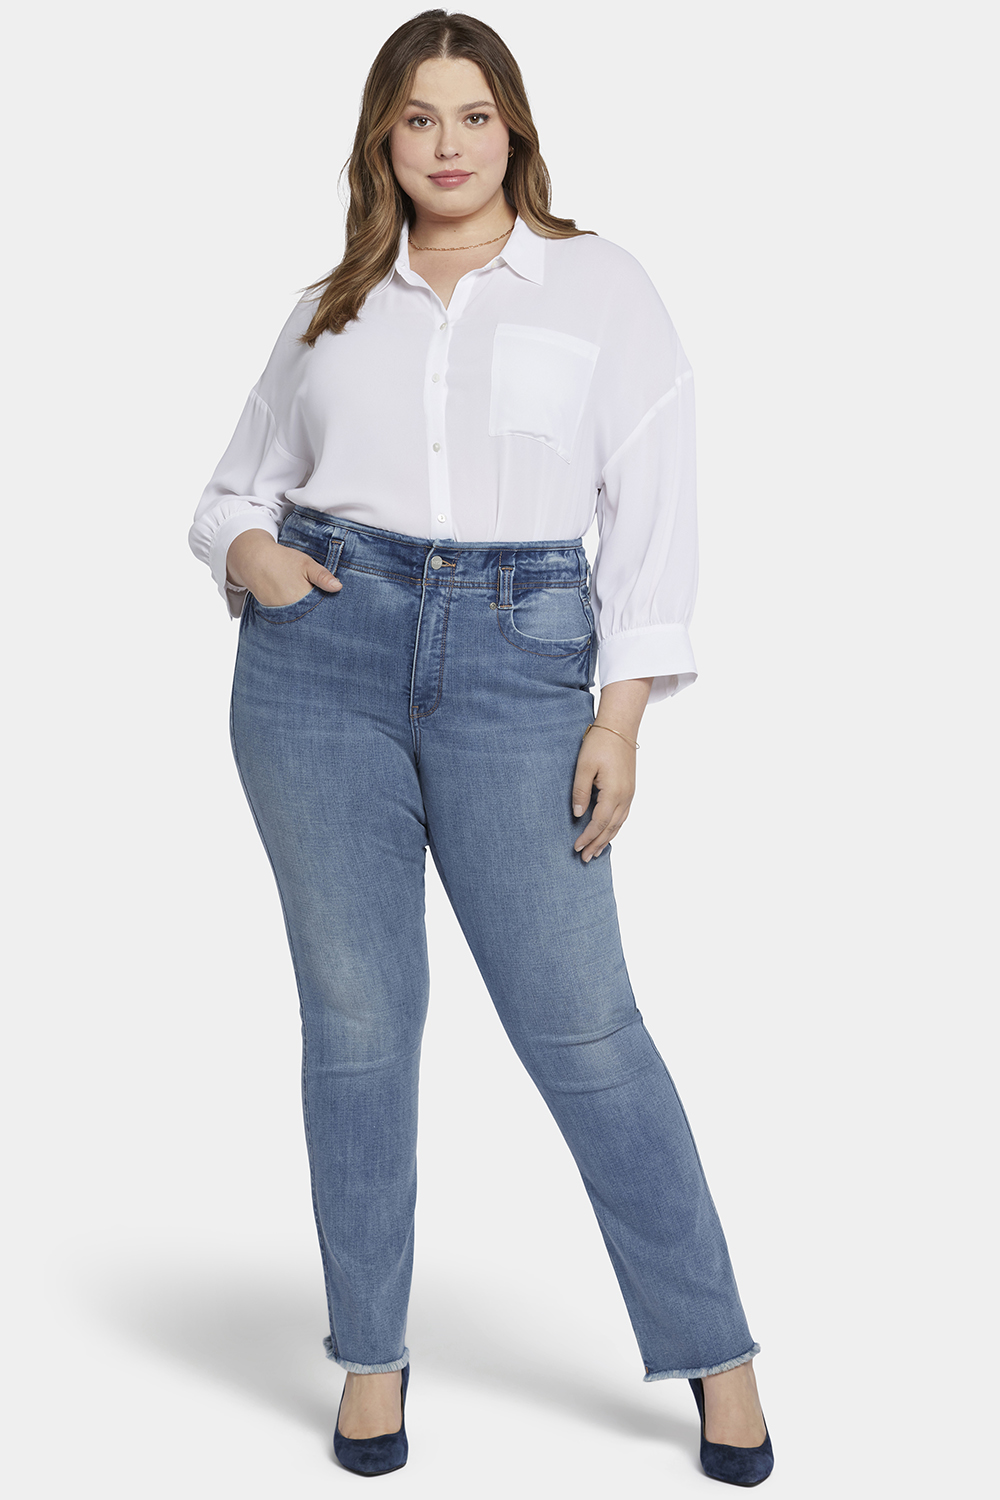 Skinny.high-waist Stretch Skinny Jeans For Women - Plus Size Slim Fit  Pencil Pants